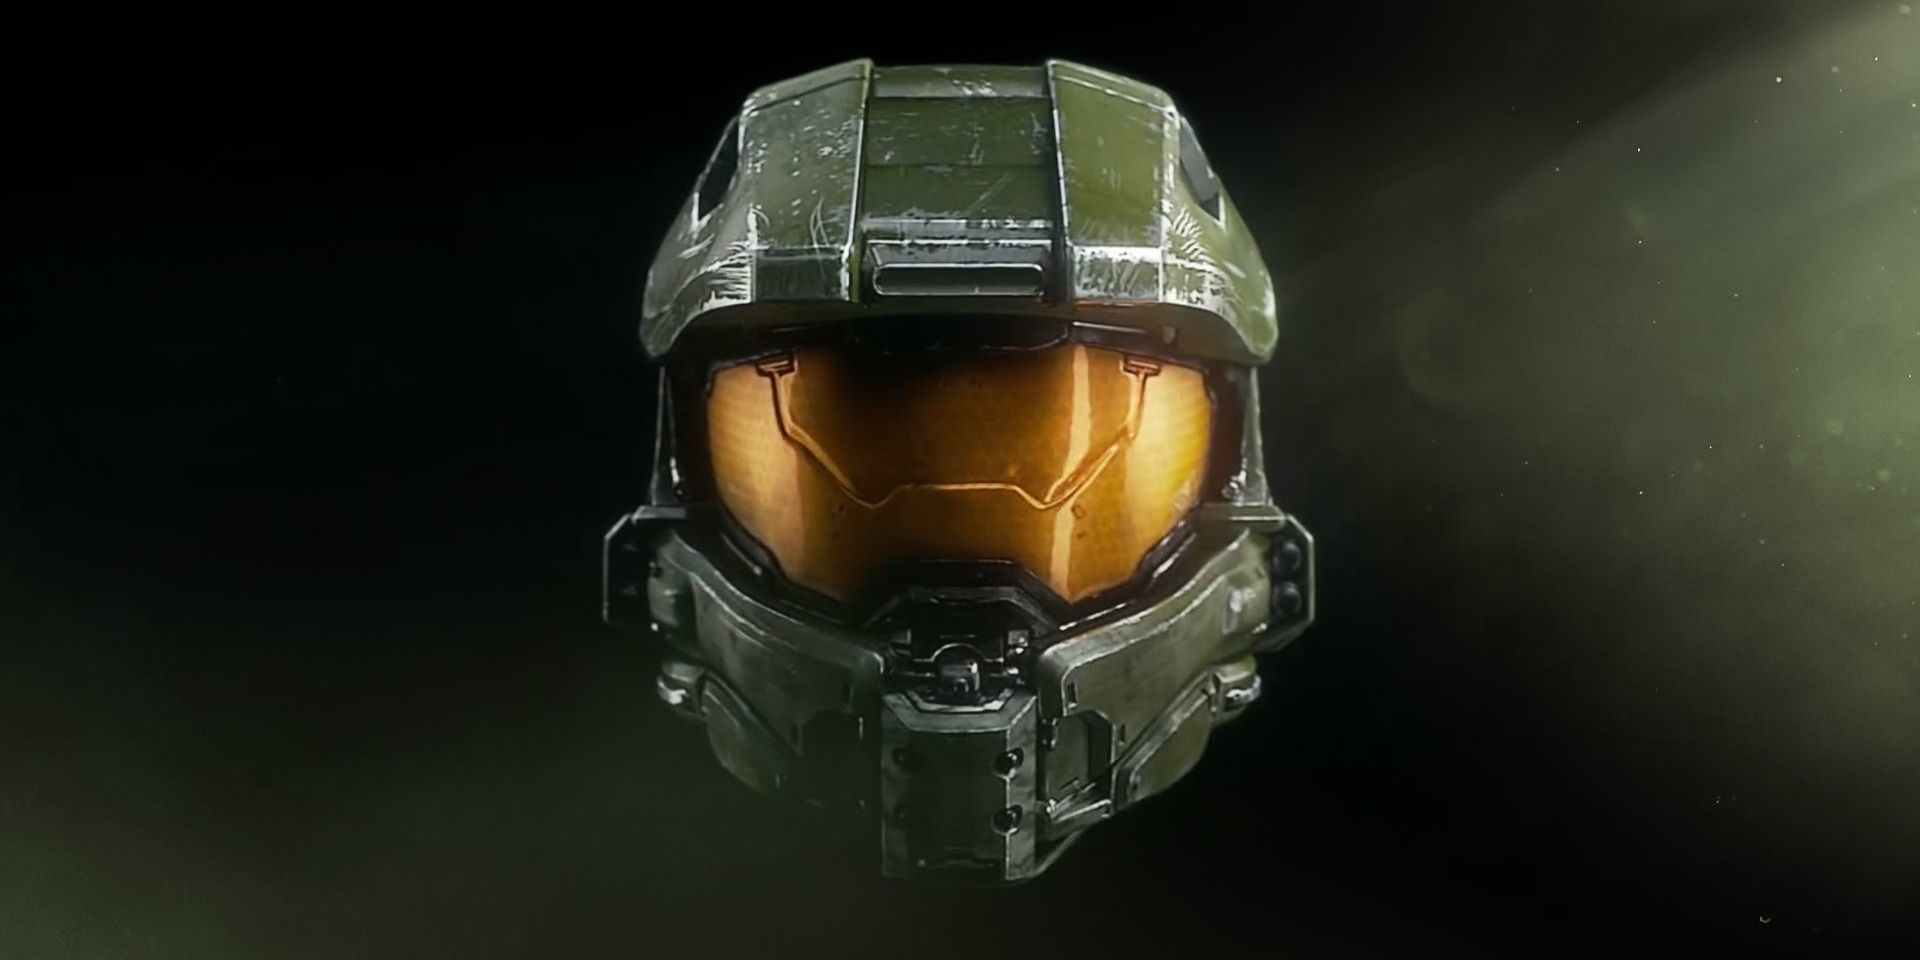 What Master Chiefs Face Looks Like And What Halo Game Shows It